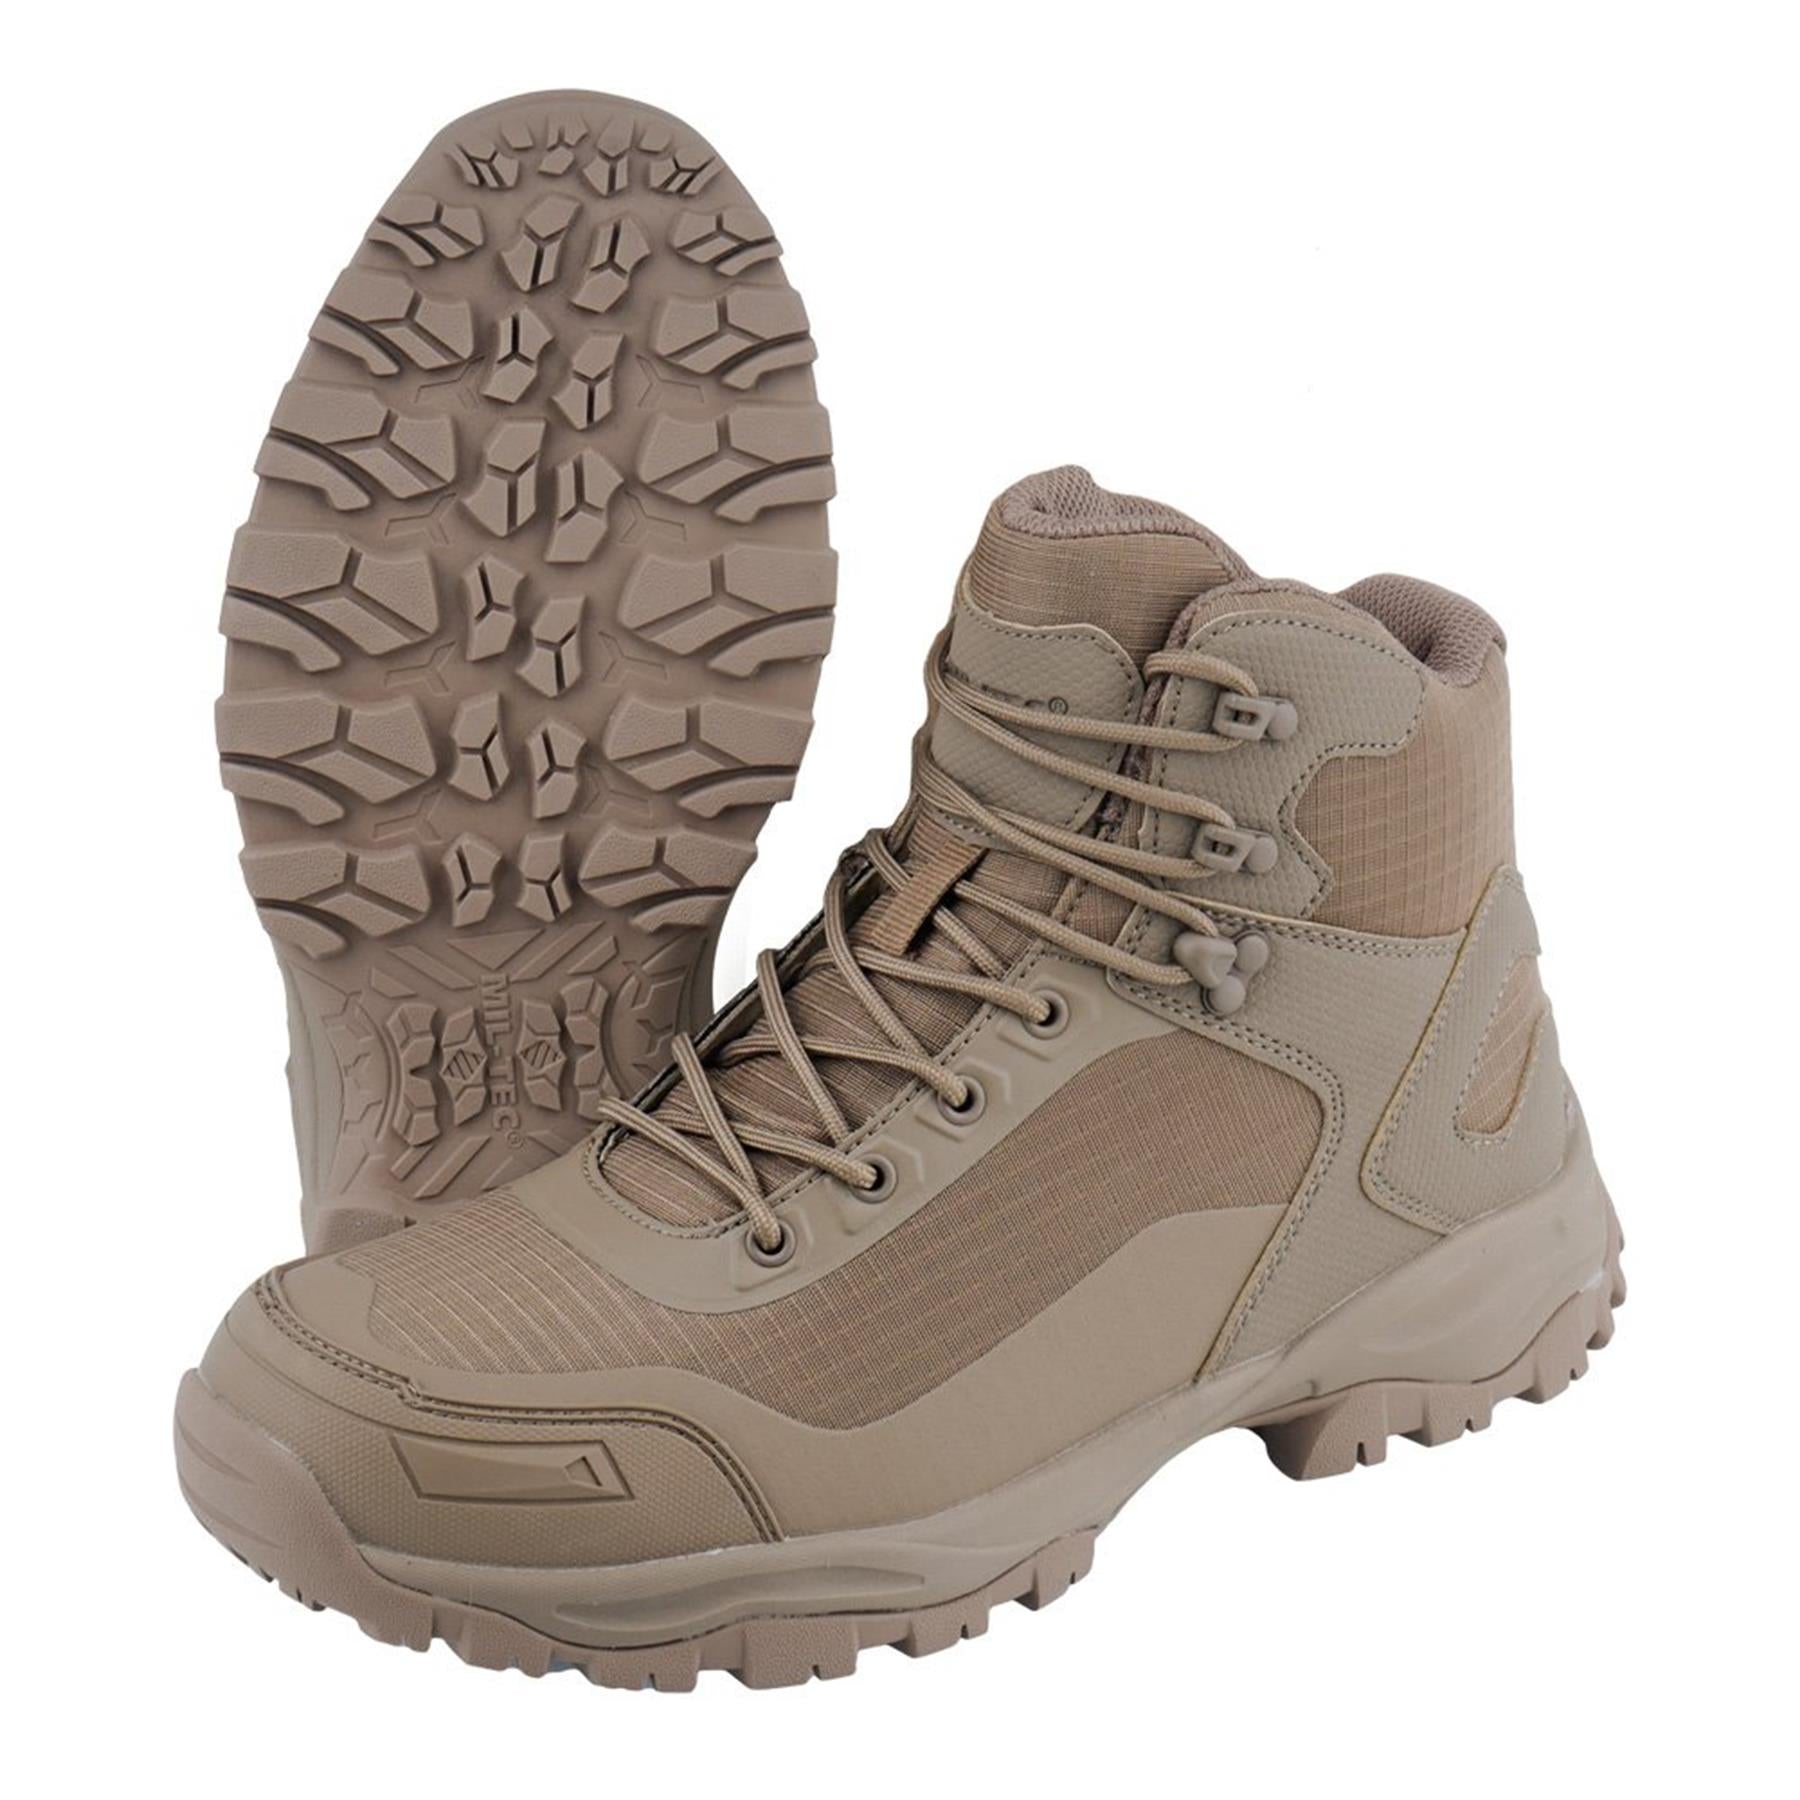 MIL-TEC active hiking boots tactical lightweight durable nonslip coyot ...